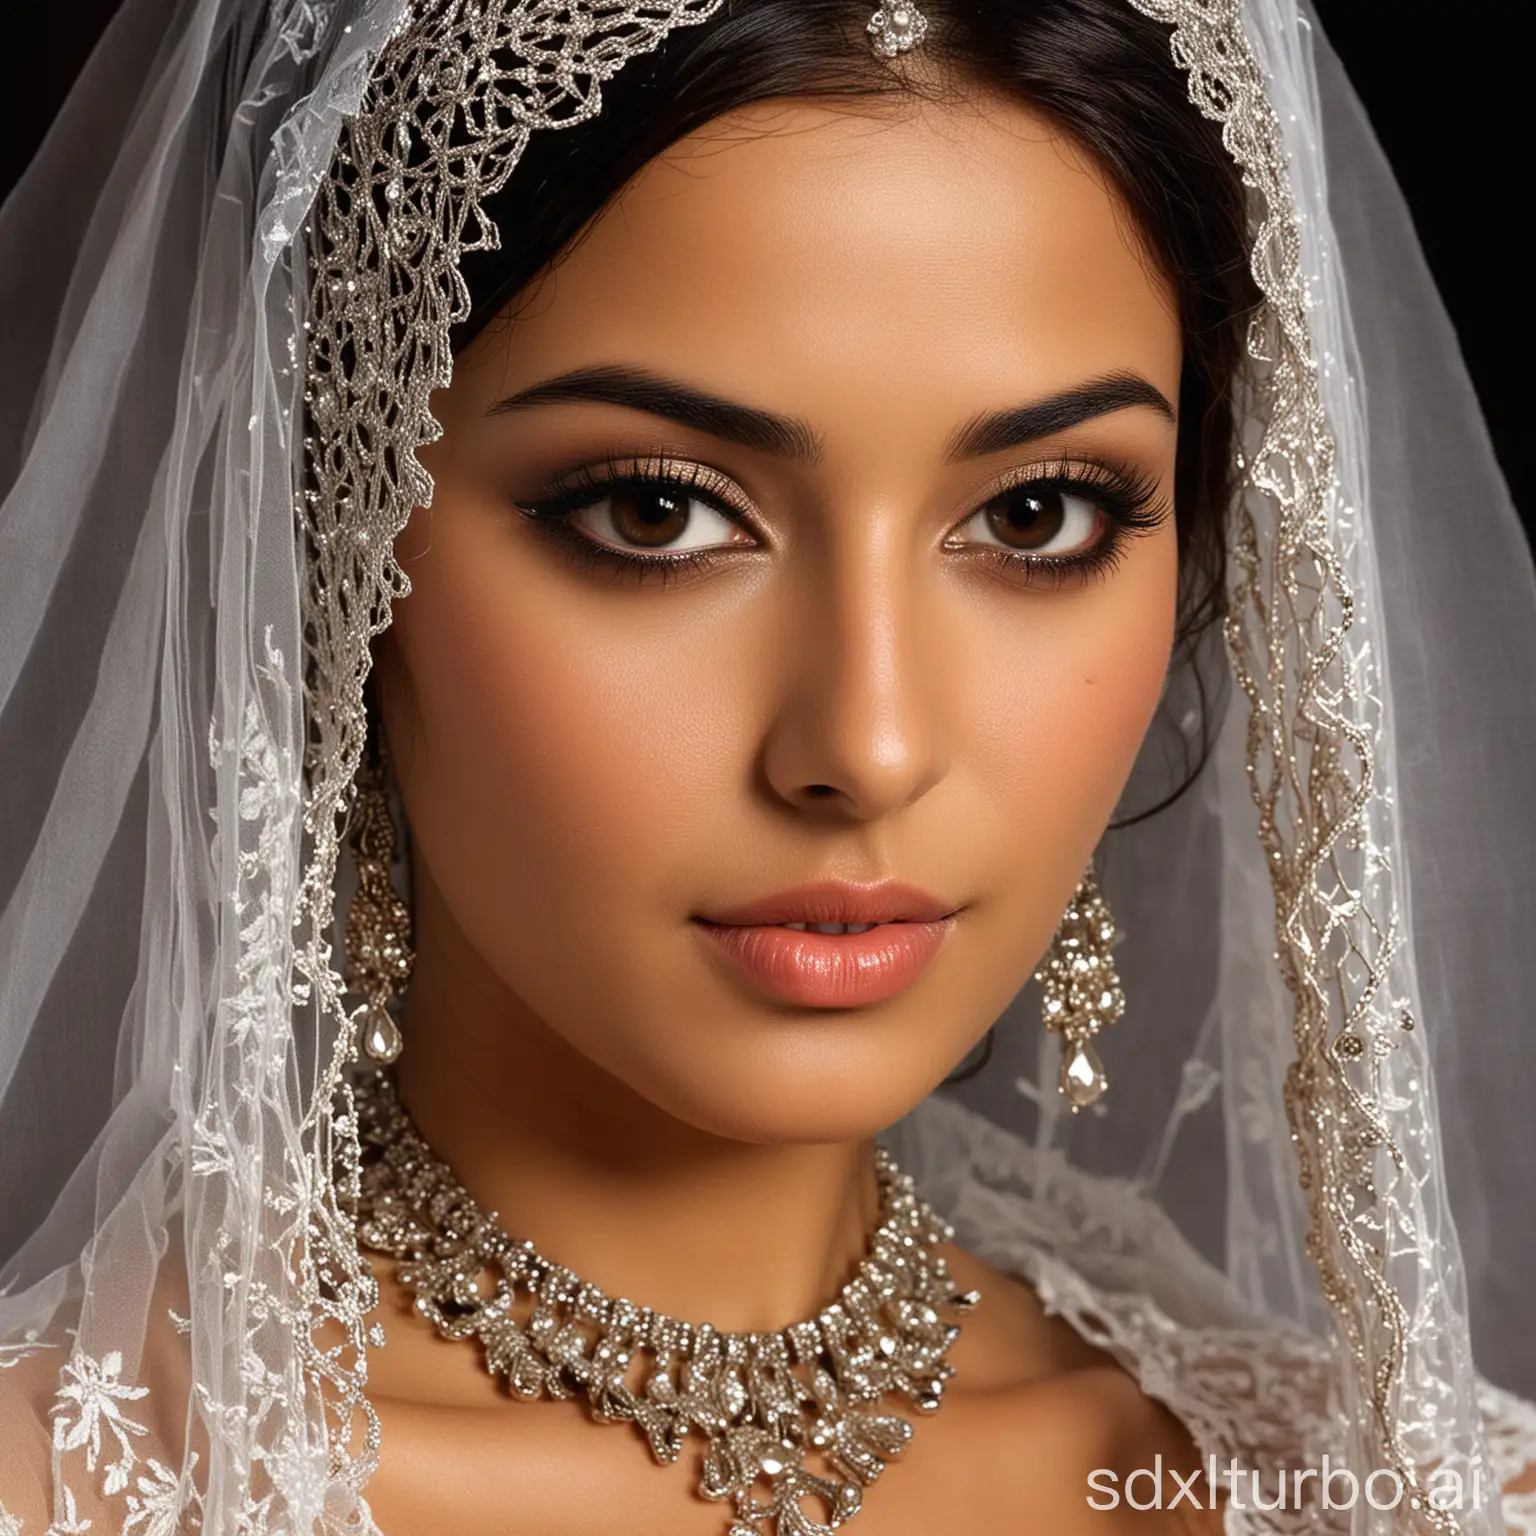 Stunning-Middle-Eastern-Beauty-Closeup-of-a-Veiled-Woman-with-Necklace